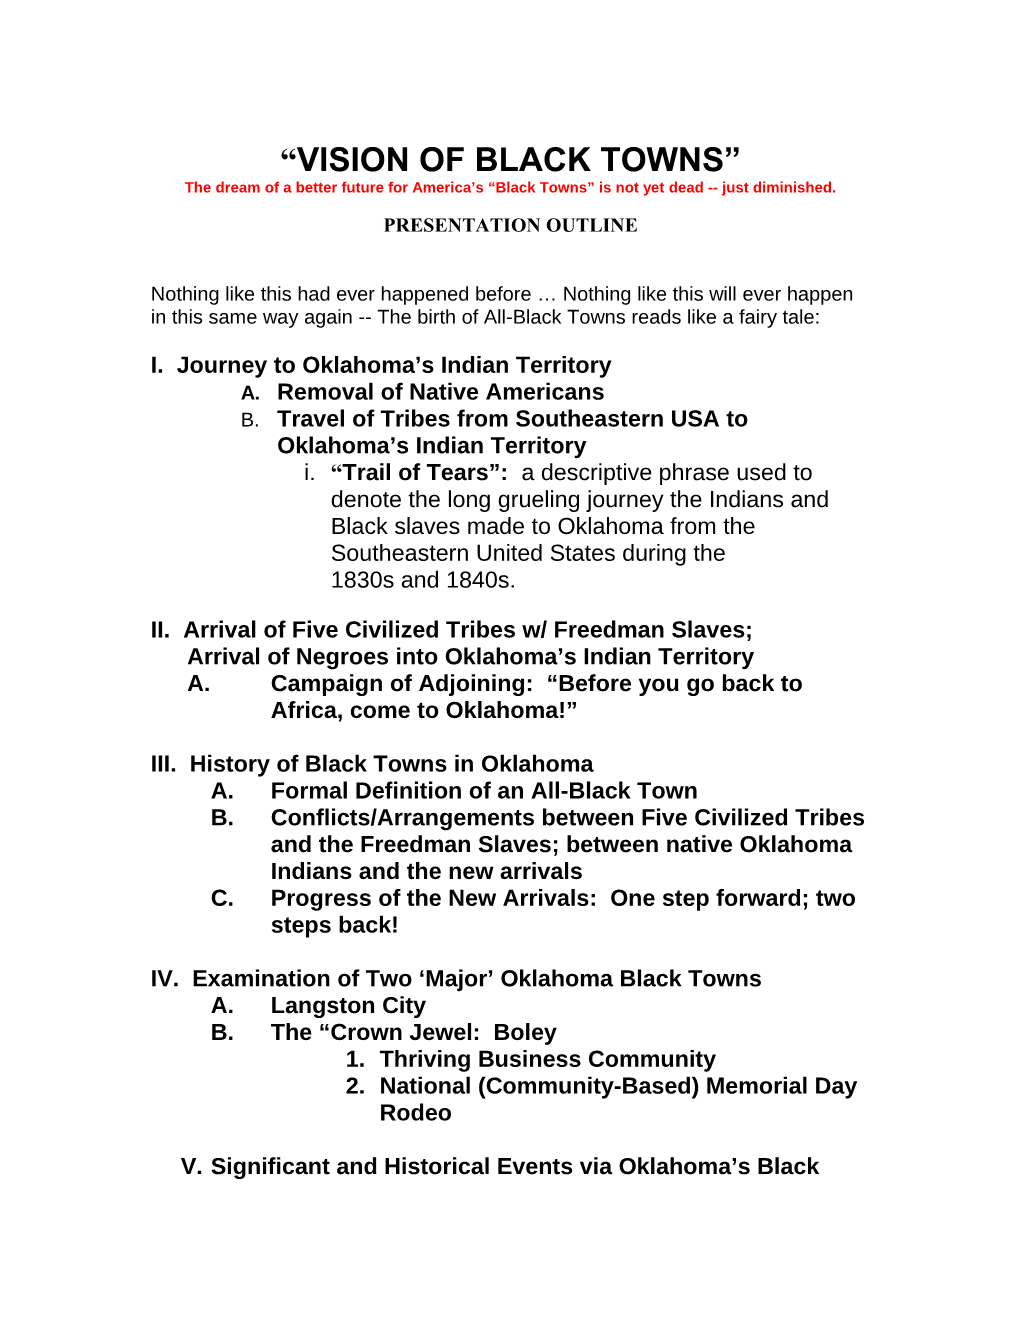 Vision of Black Towns